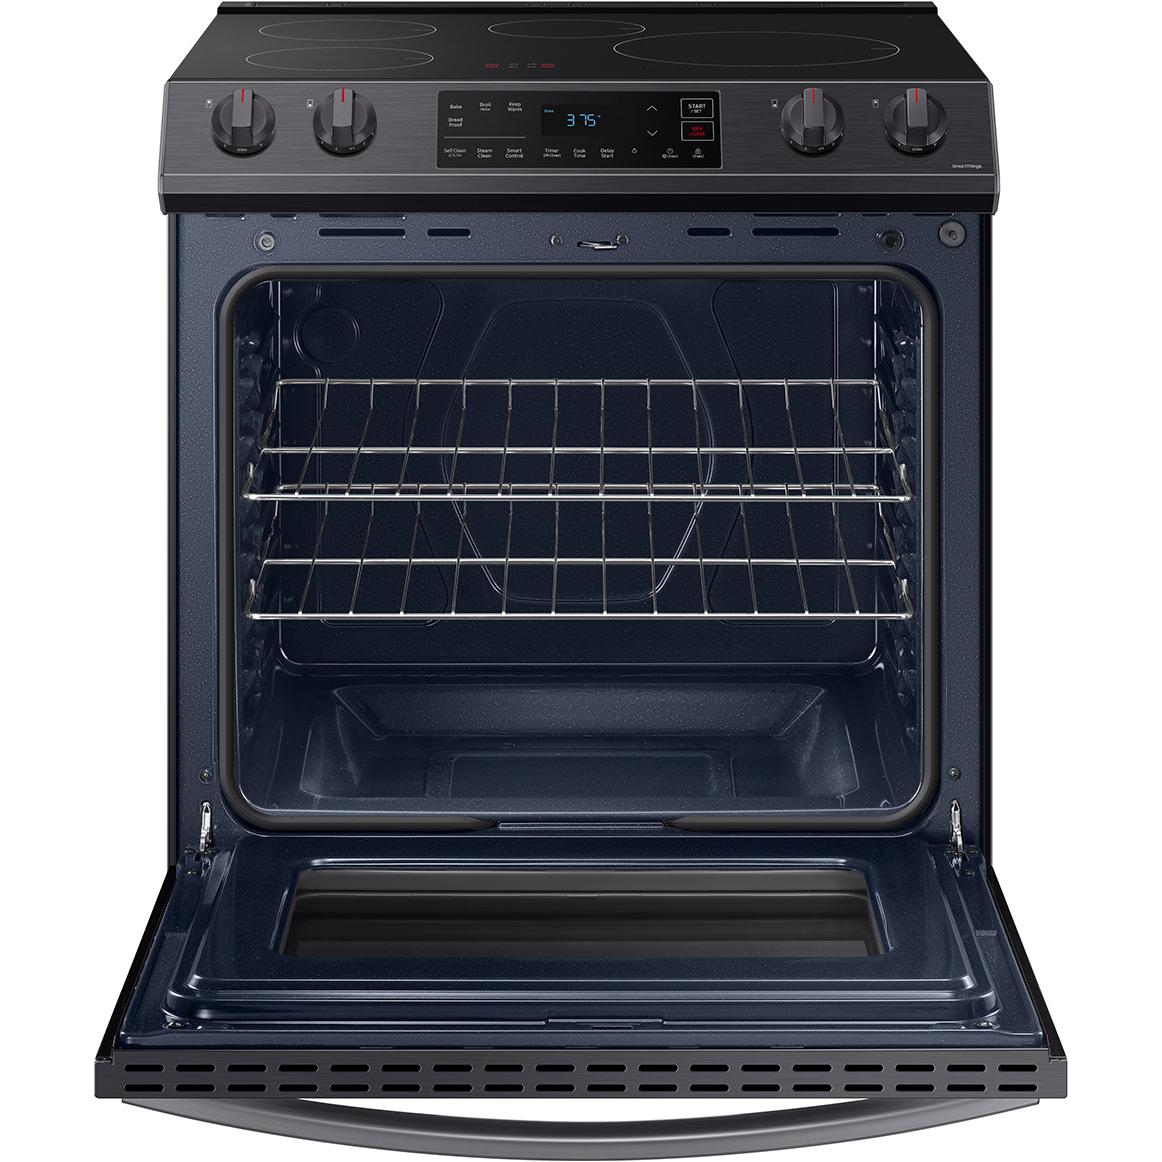 Samsung 30-inch Slide-in Induction/Electric Range with Self-Cleaning Oven NE63B8211SG